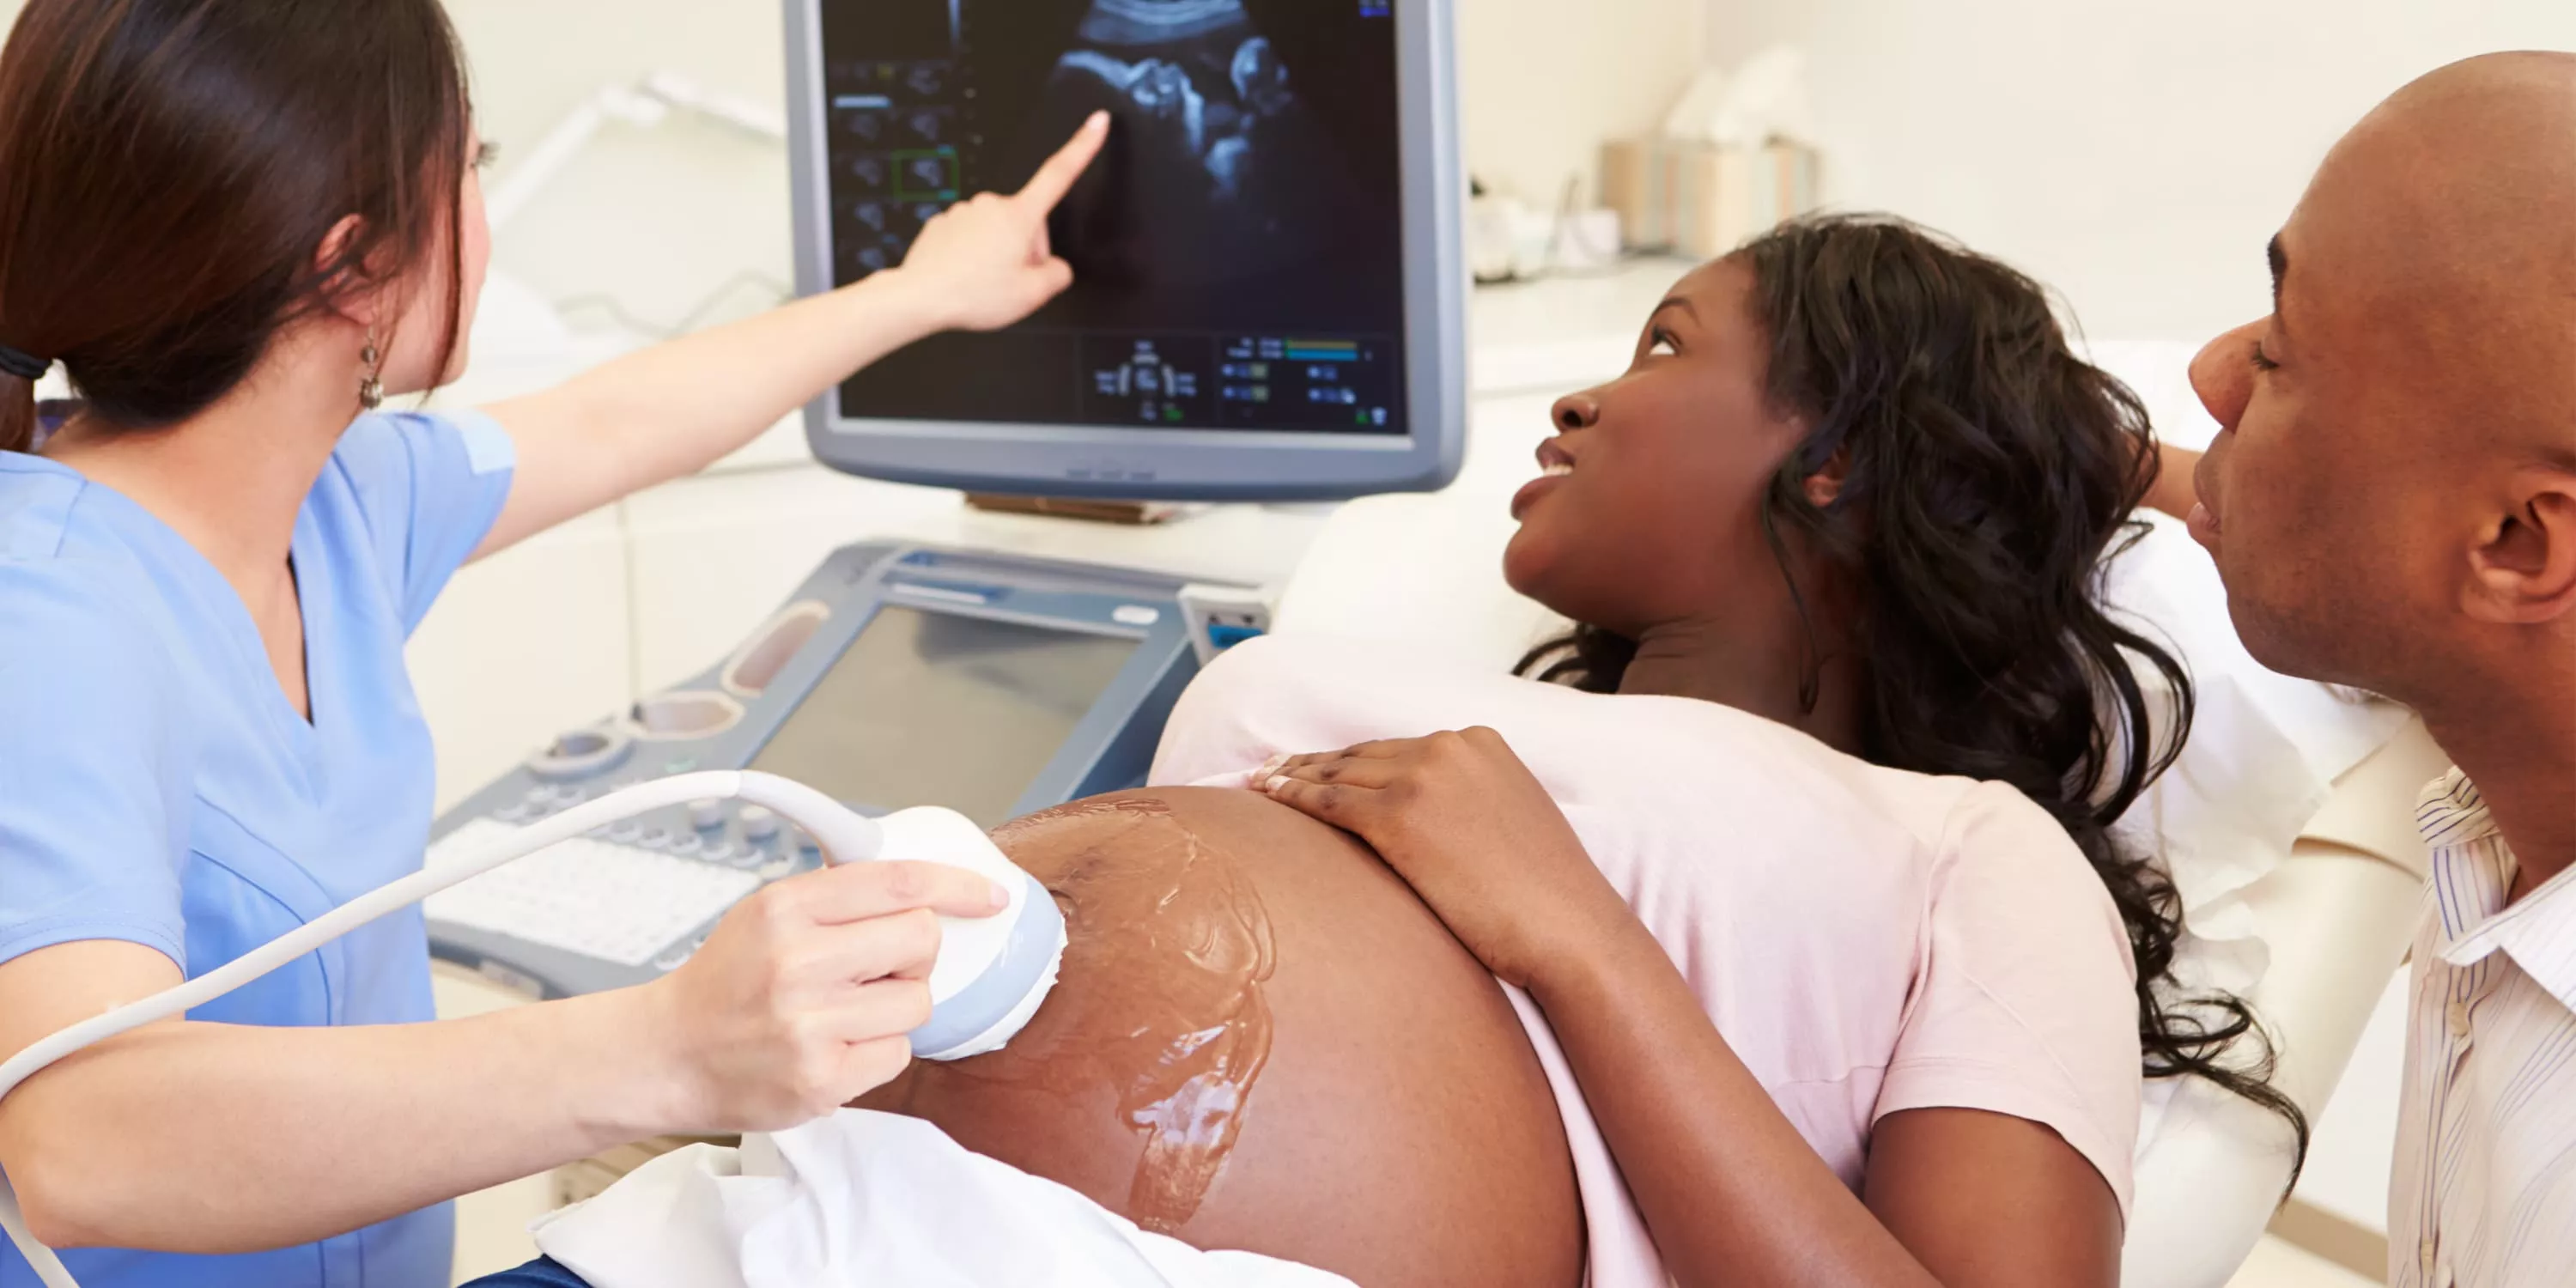 Pregnant woman with partner at an ultrasound scan